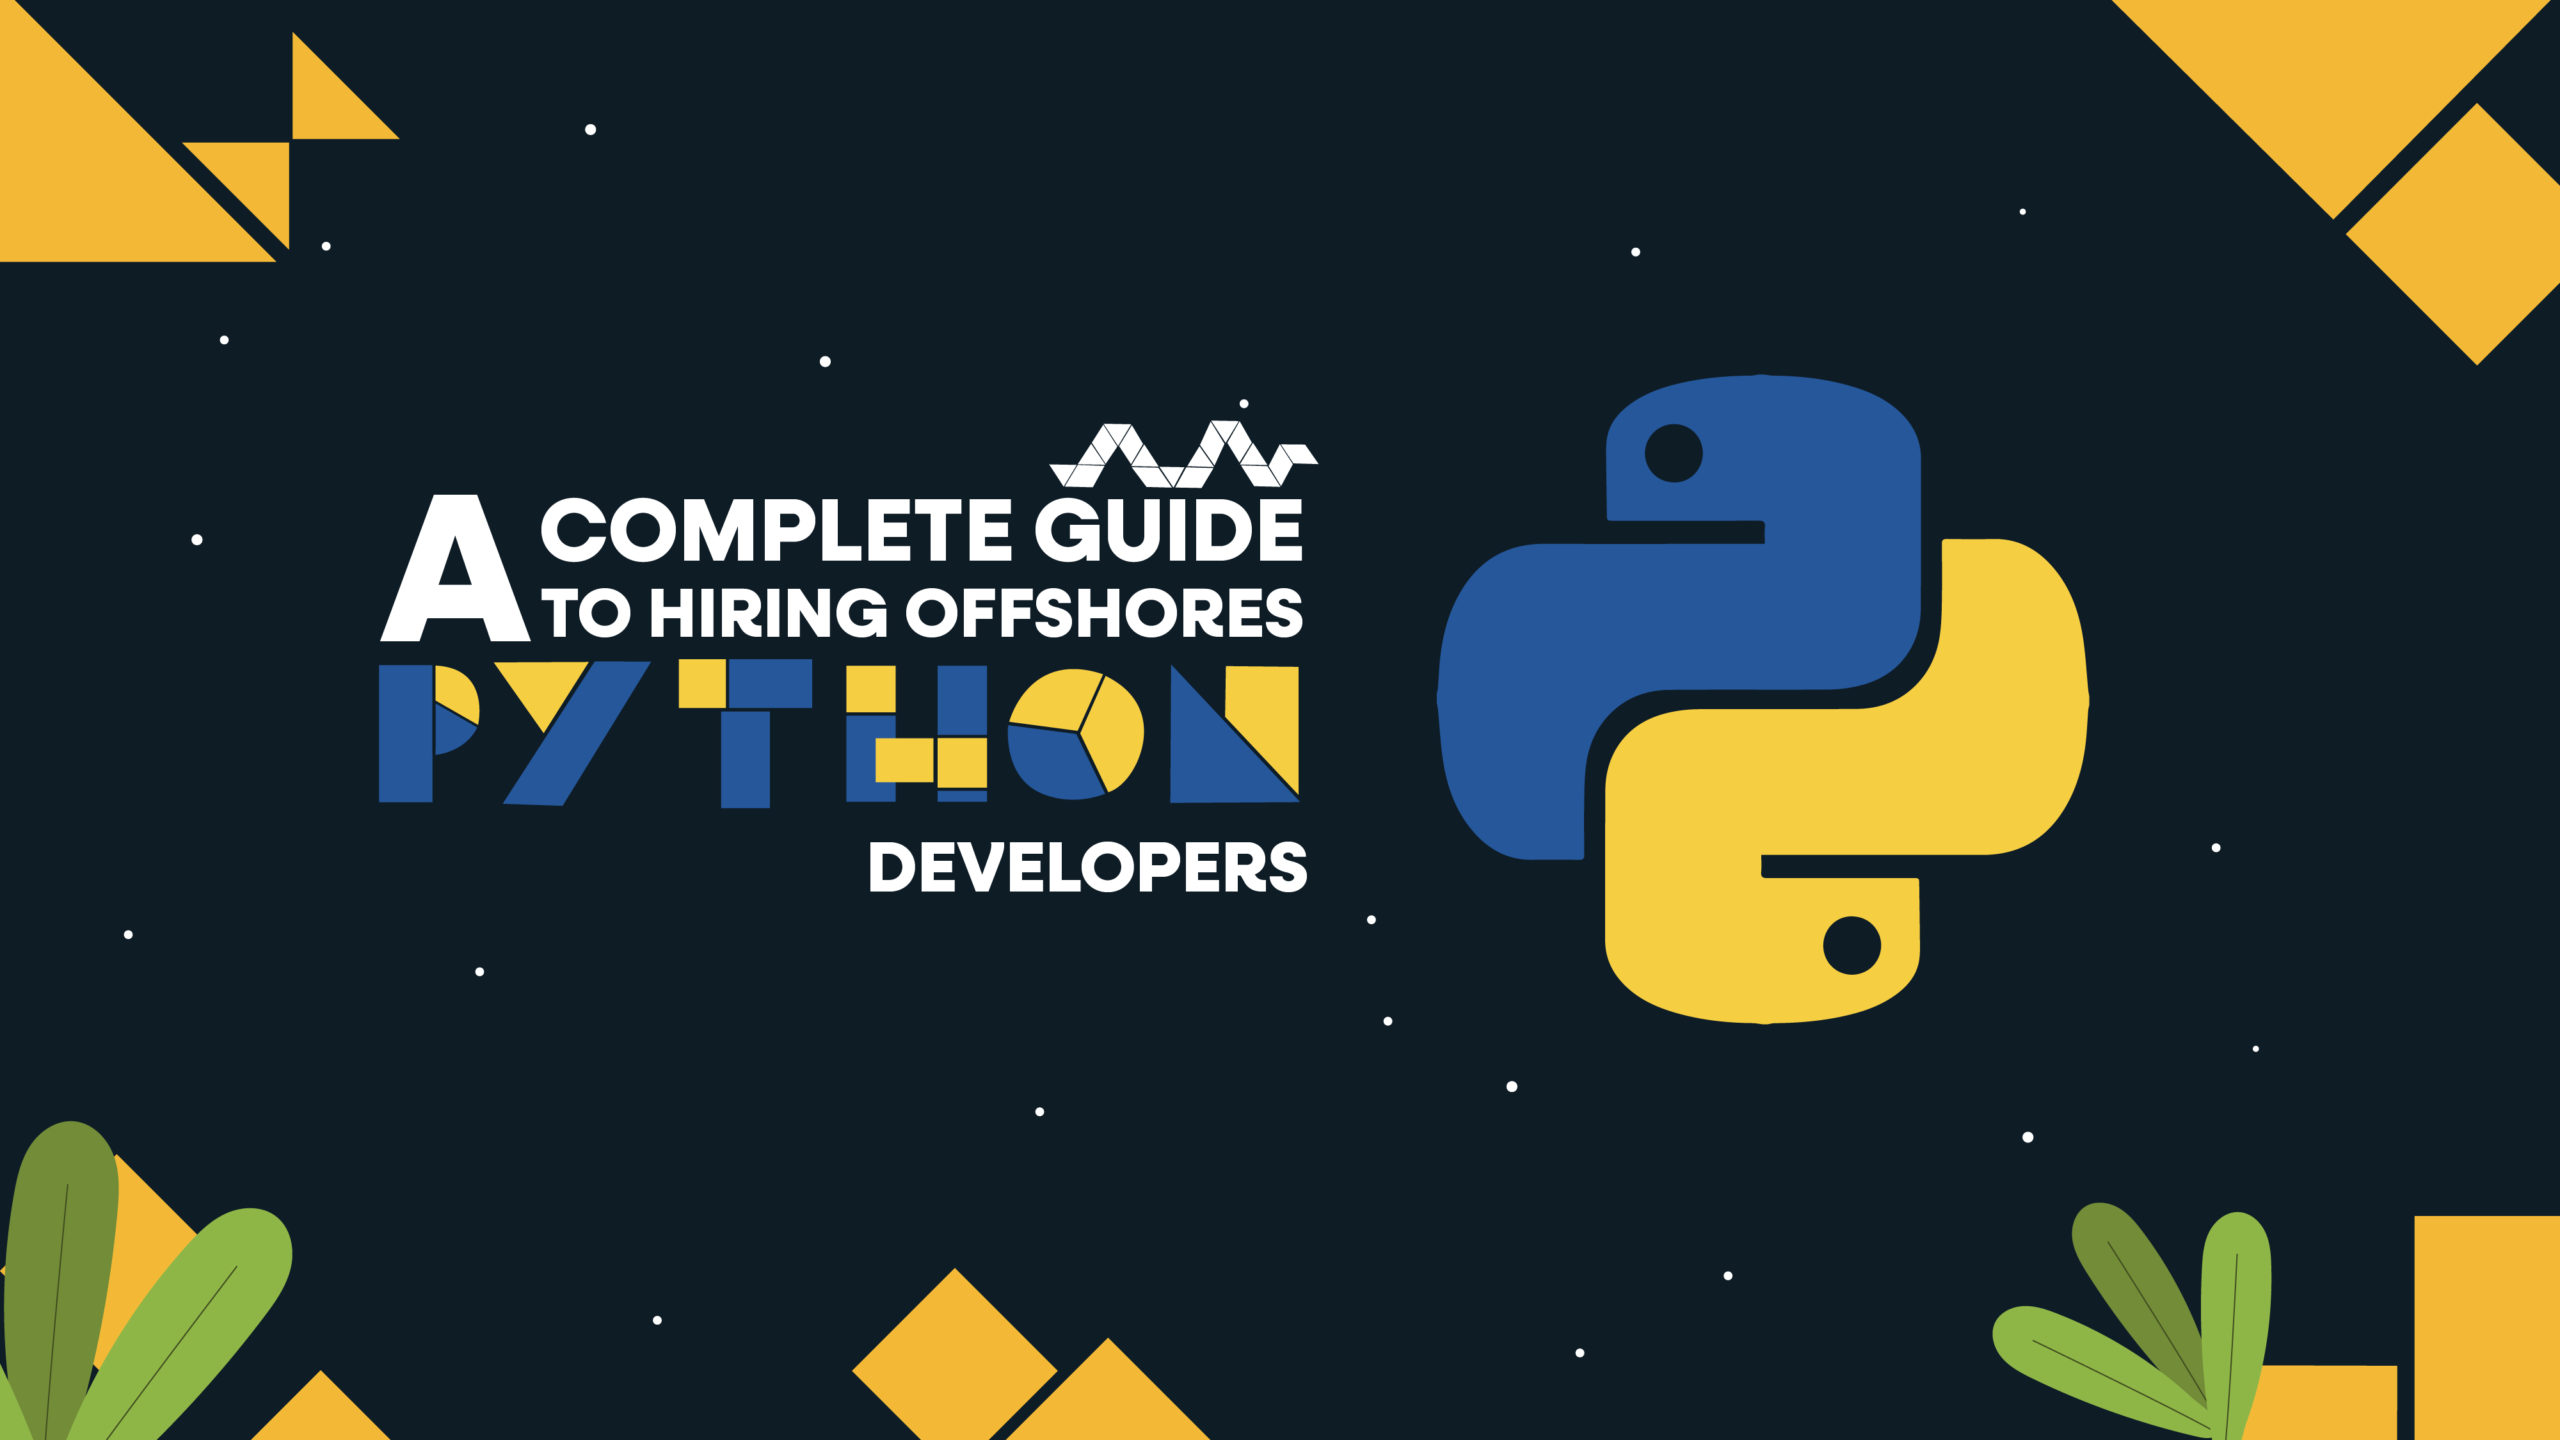 A Complete Guide to Hiring Offshore Python Developers